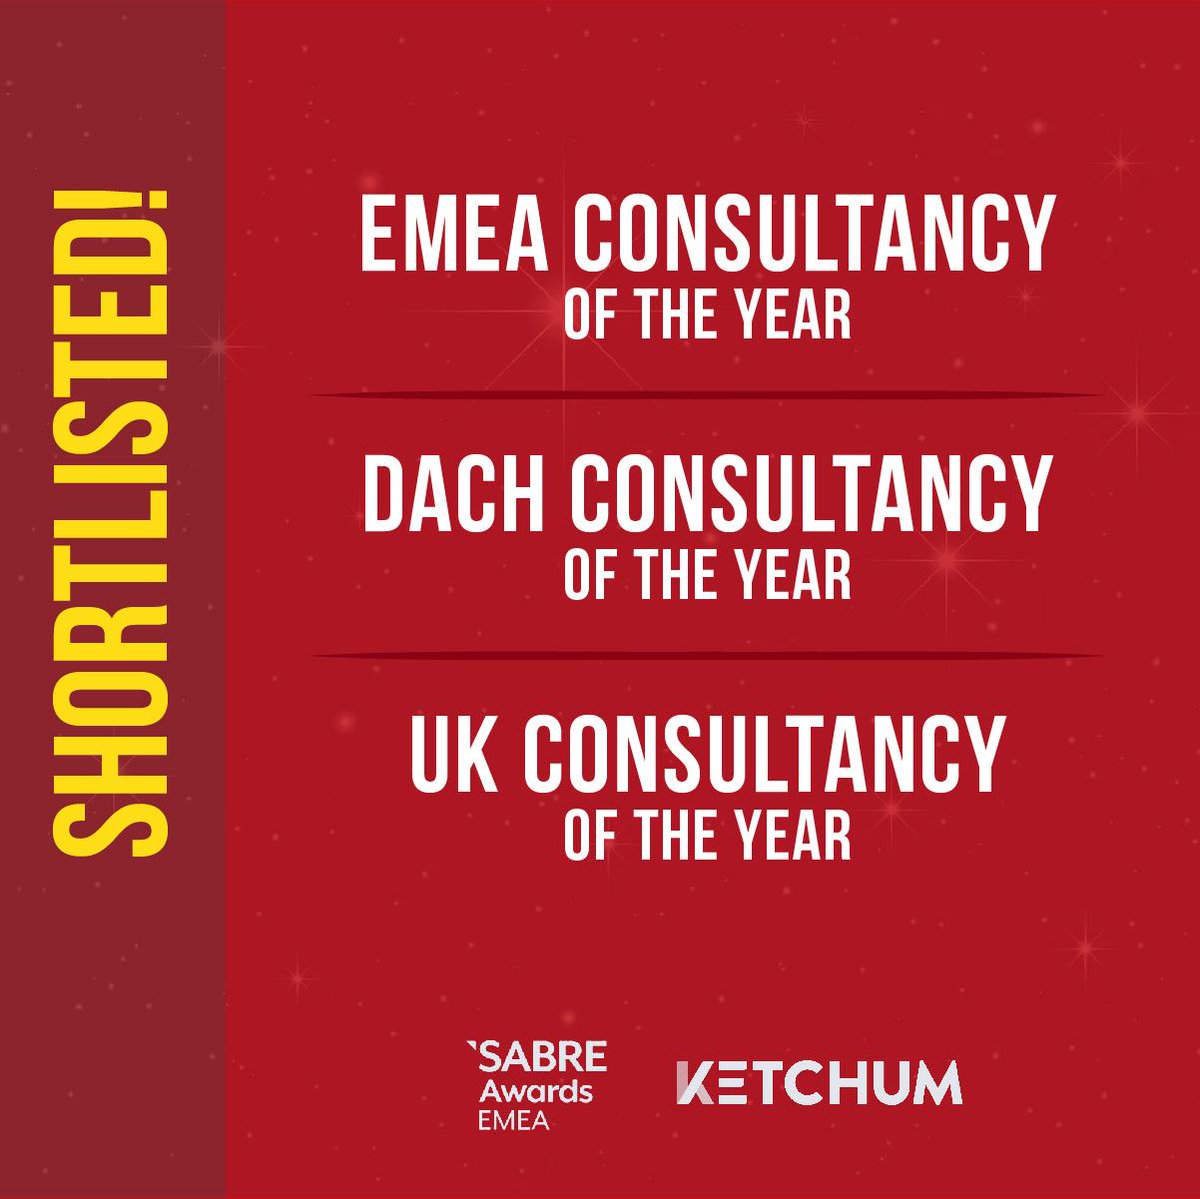 Our global teams are on fire with a hat trick 🎩 🎩 🎩 as @KetchumUk, @KetchumGer and our EMEA teams are shortlisted for Consultancy of the Year at the @PRovoke_news EMEA SABRE Awards. #Ketchumproud of their commitment and drive to create #workthatmatters. Congratulations!